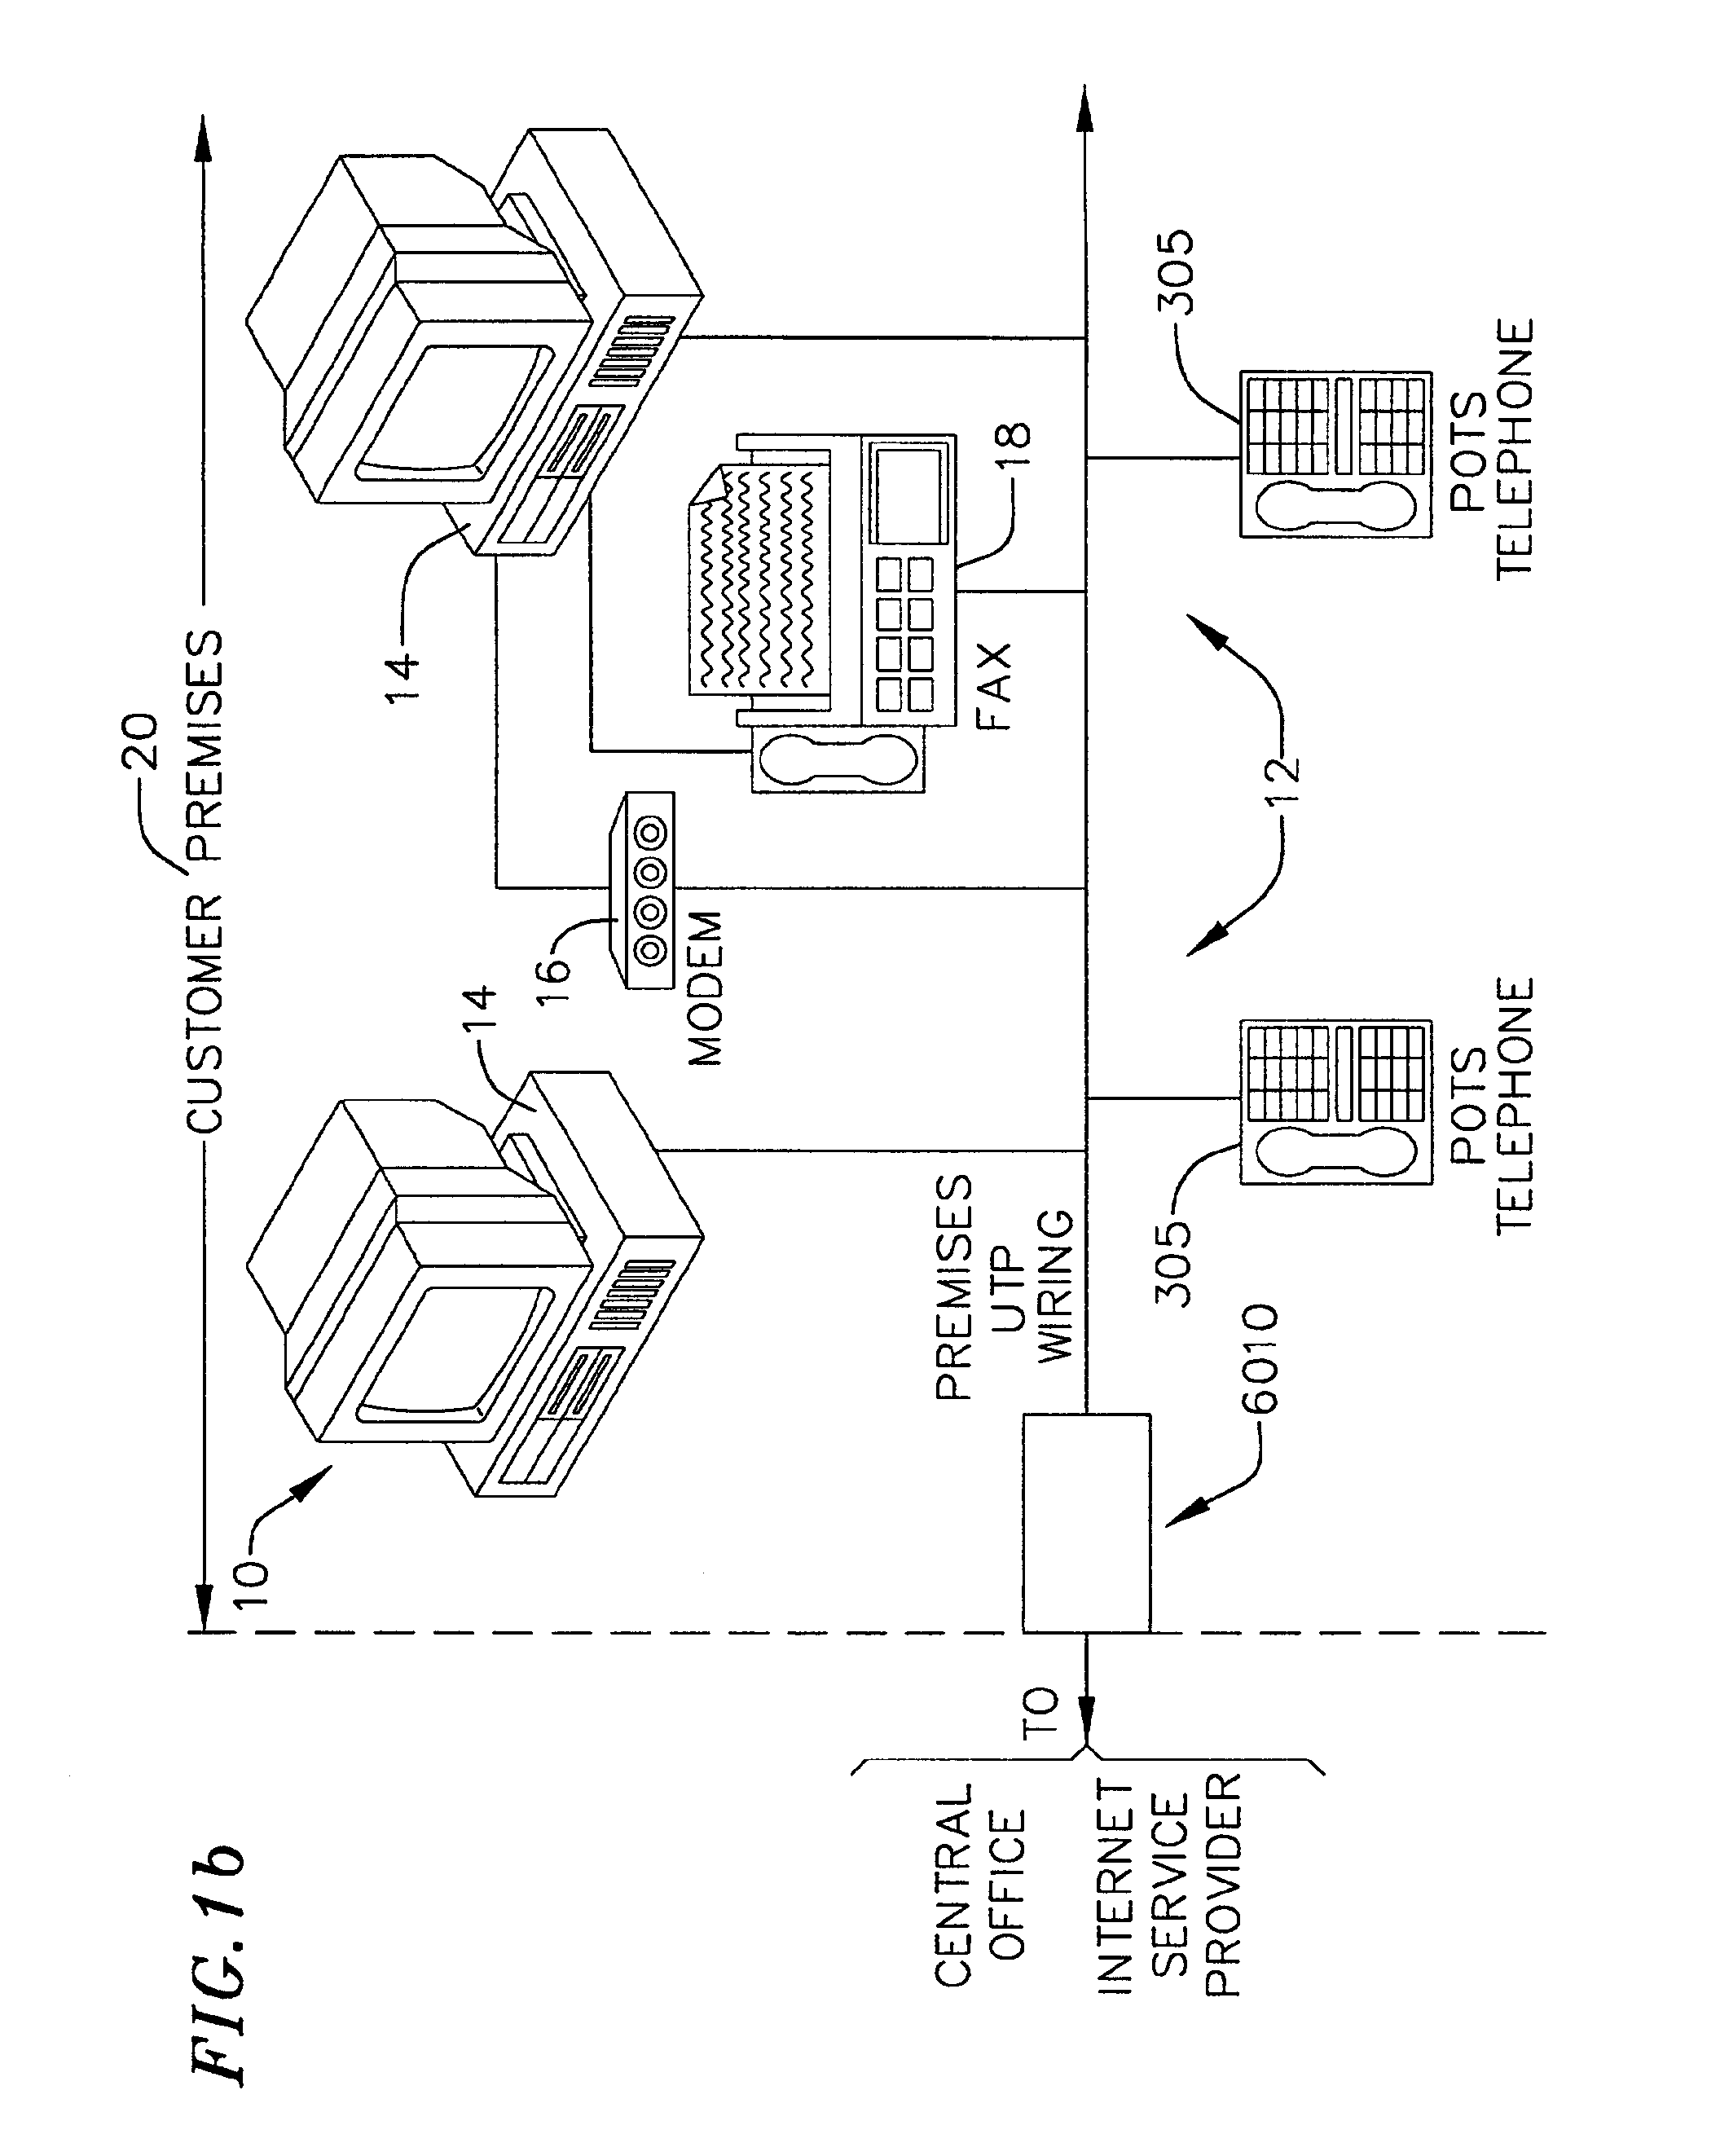 Method for selecting an operating mode for a frame-based communications network